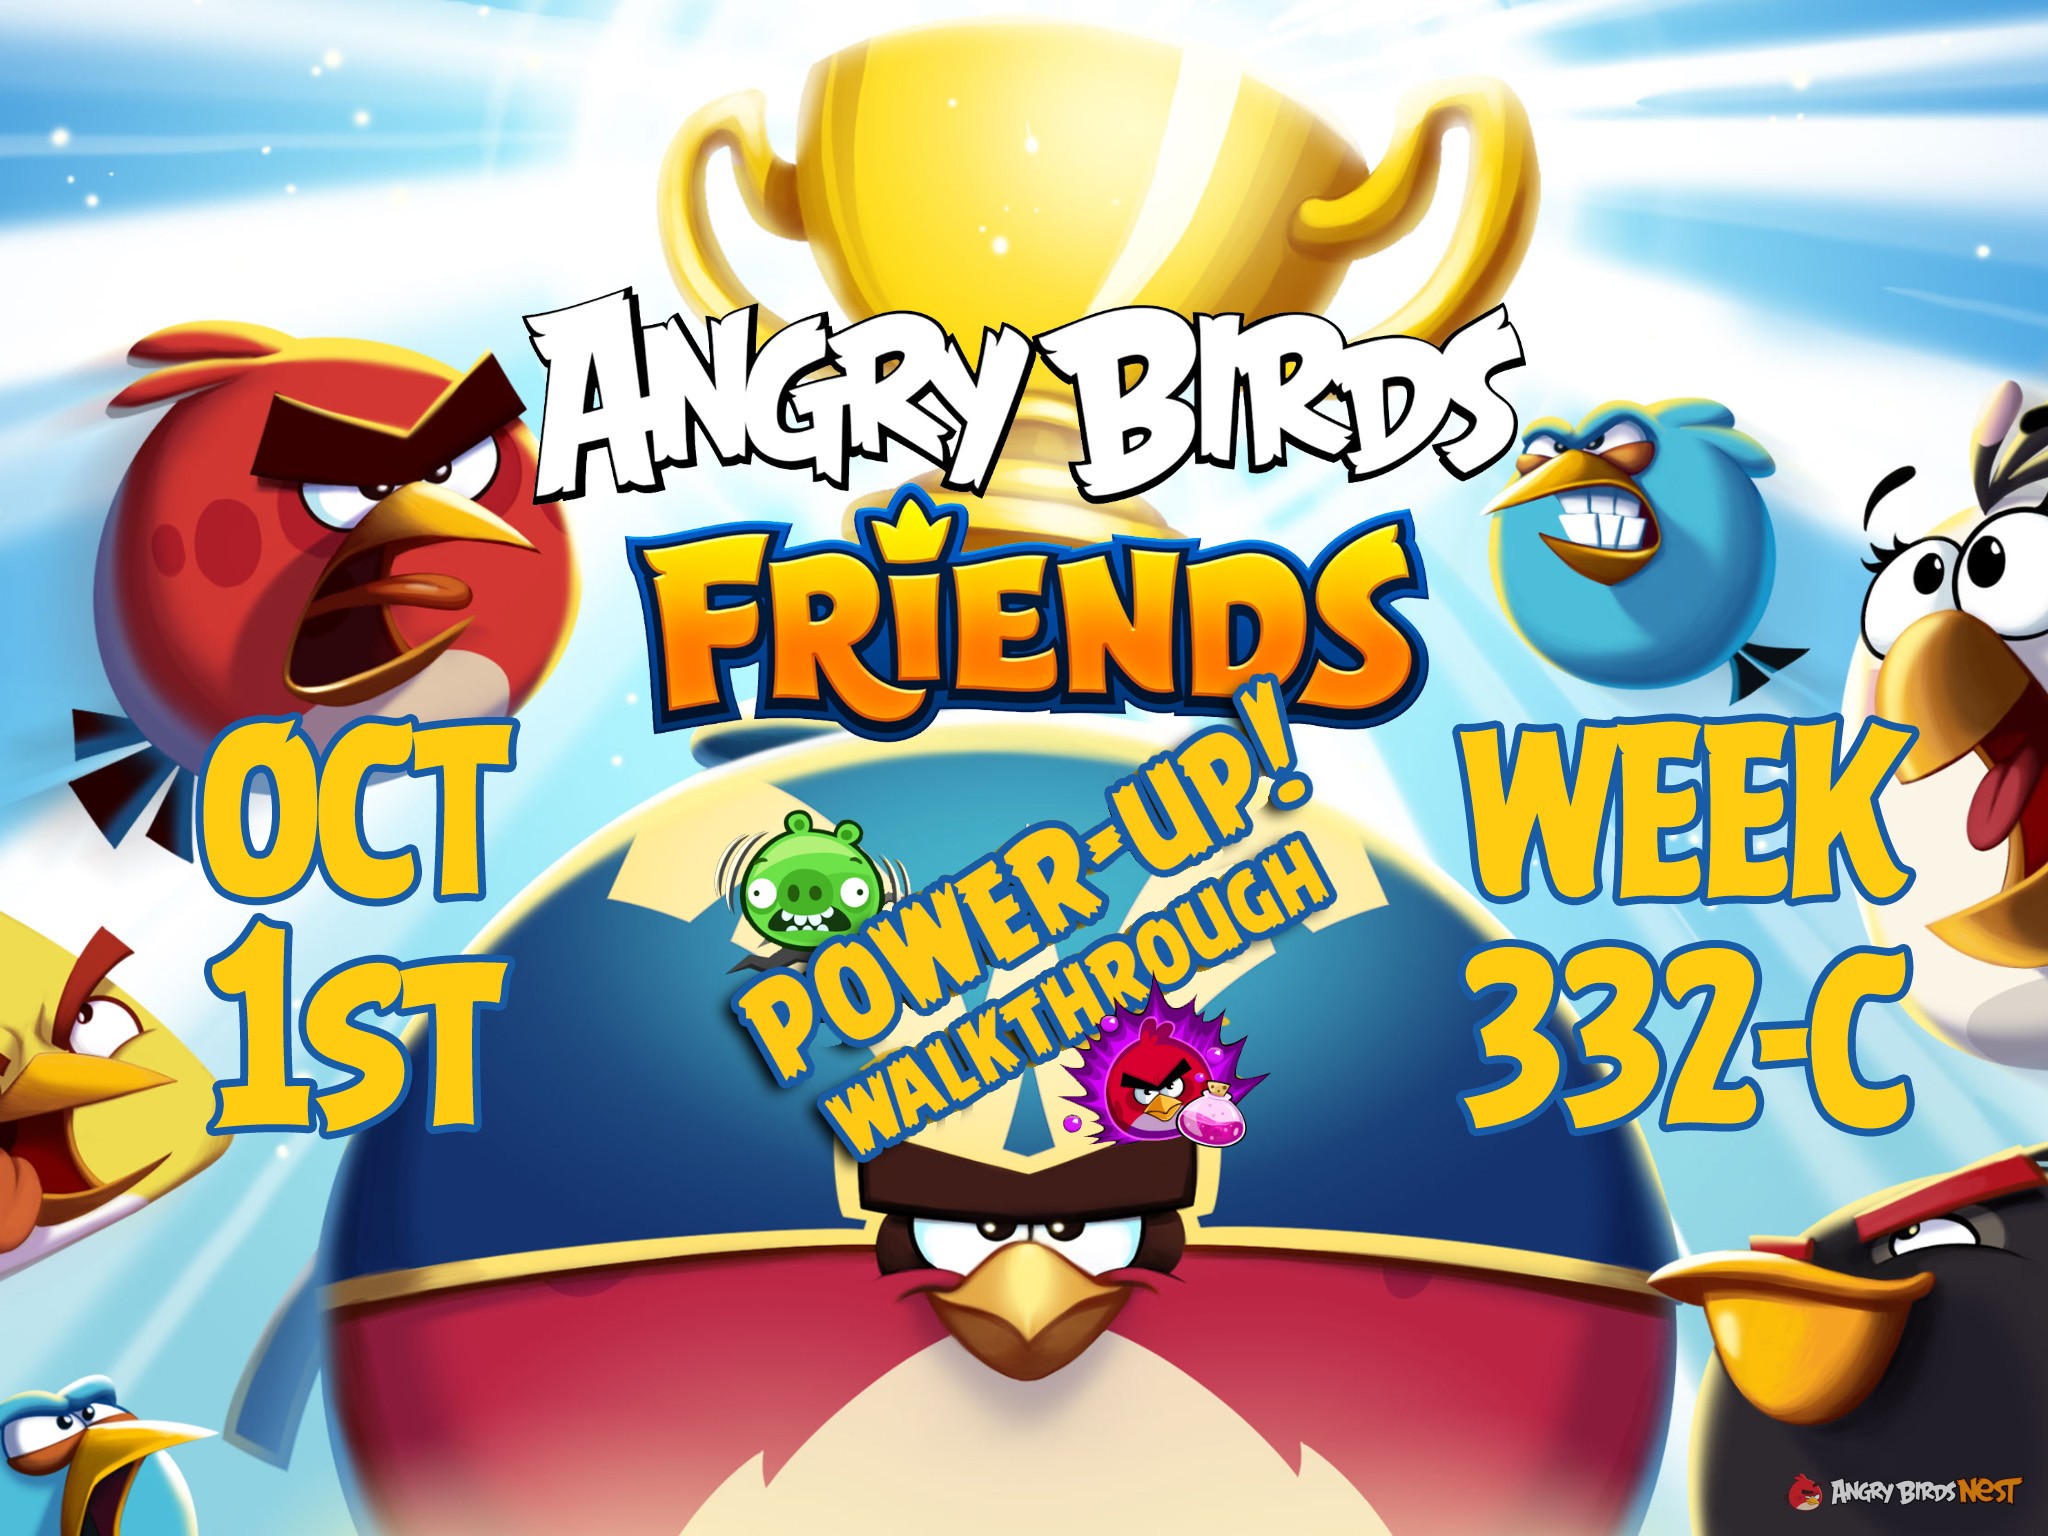 Angry-Birds-Friends-Tournament-Week-332-C-Feature-Image-PU